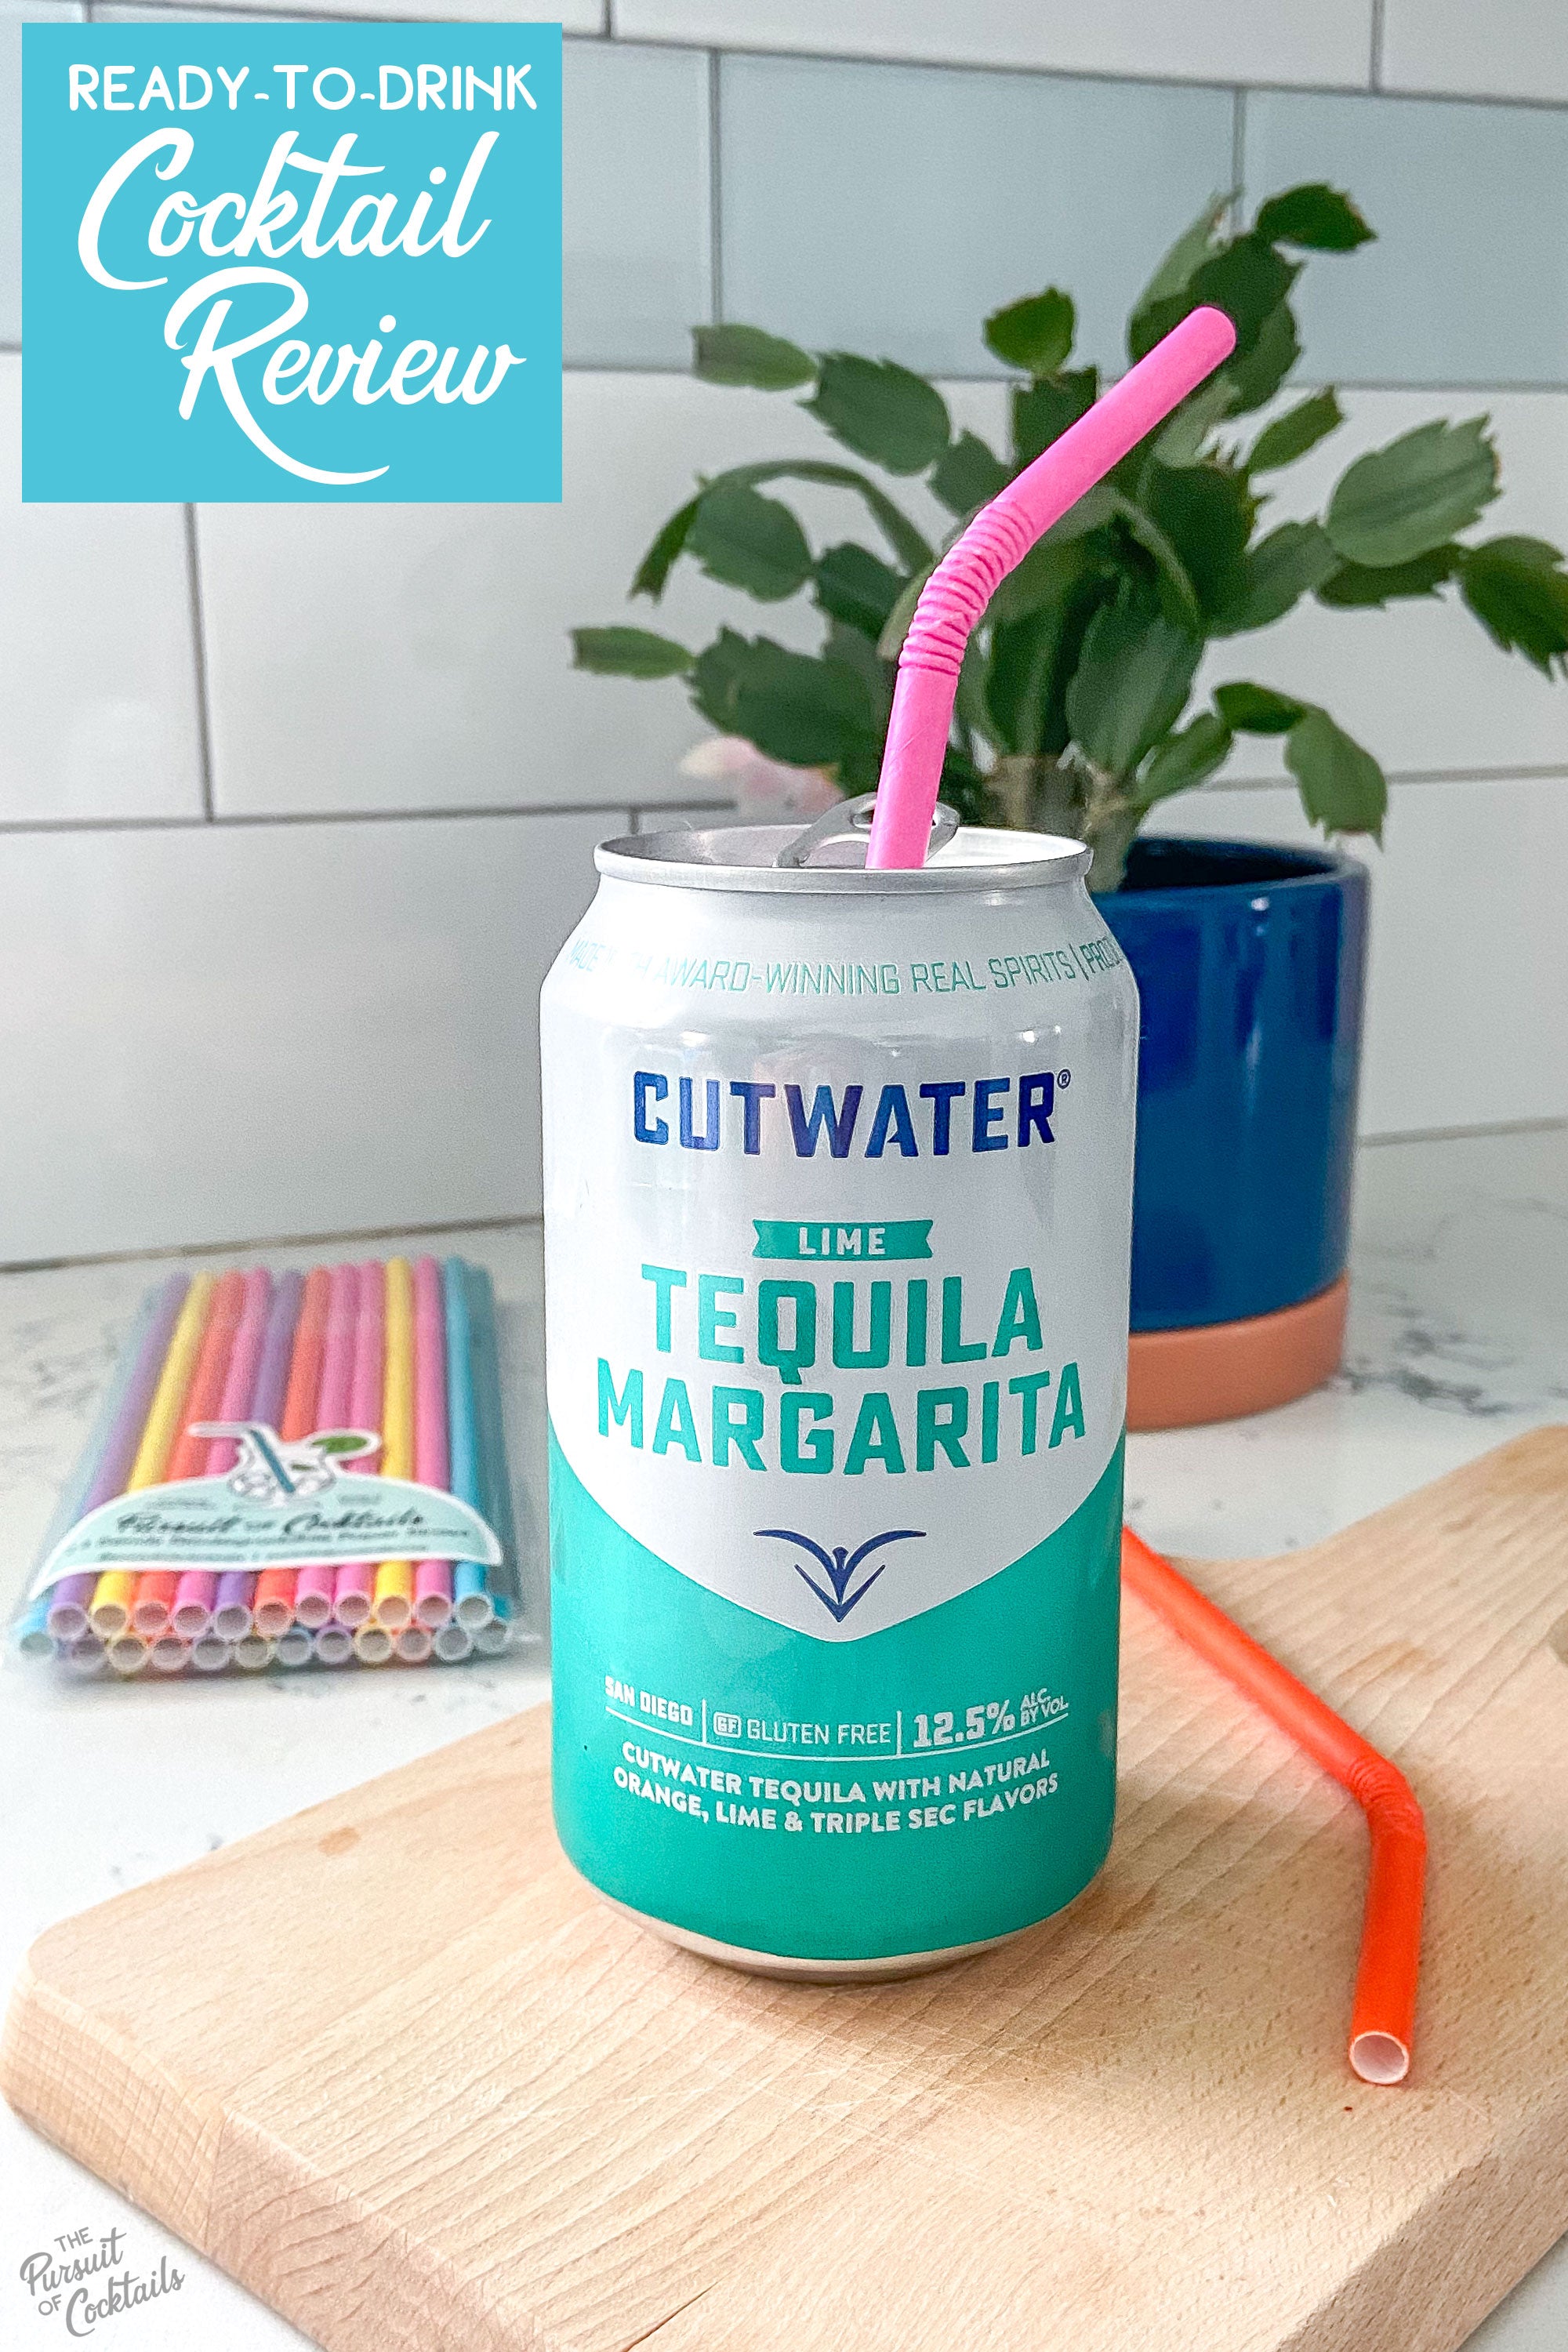 Cutwater Tequila Margarita canned cocktail reviewed by The Pursuit of Cocktails